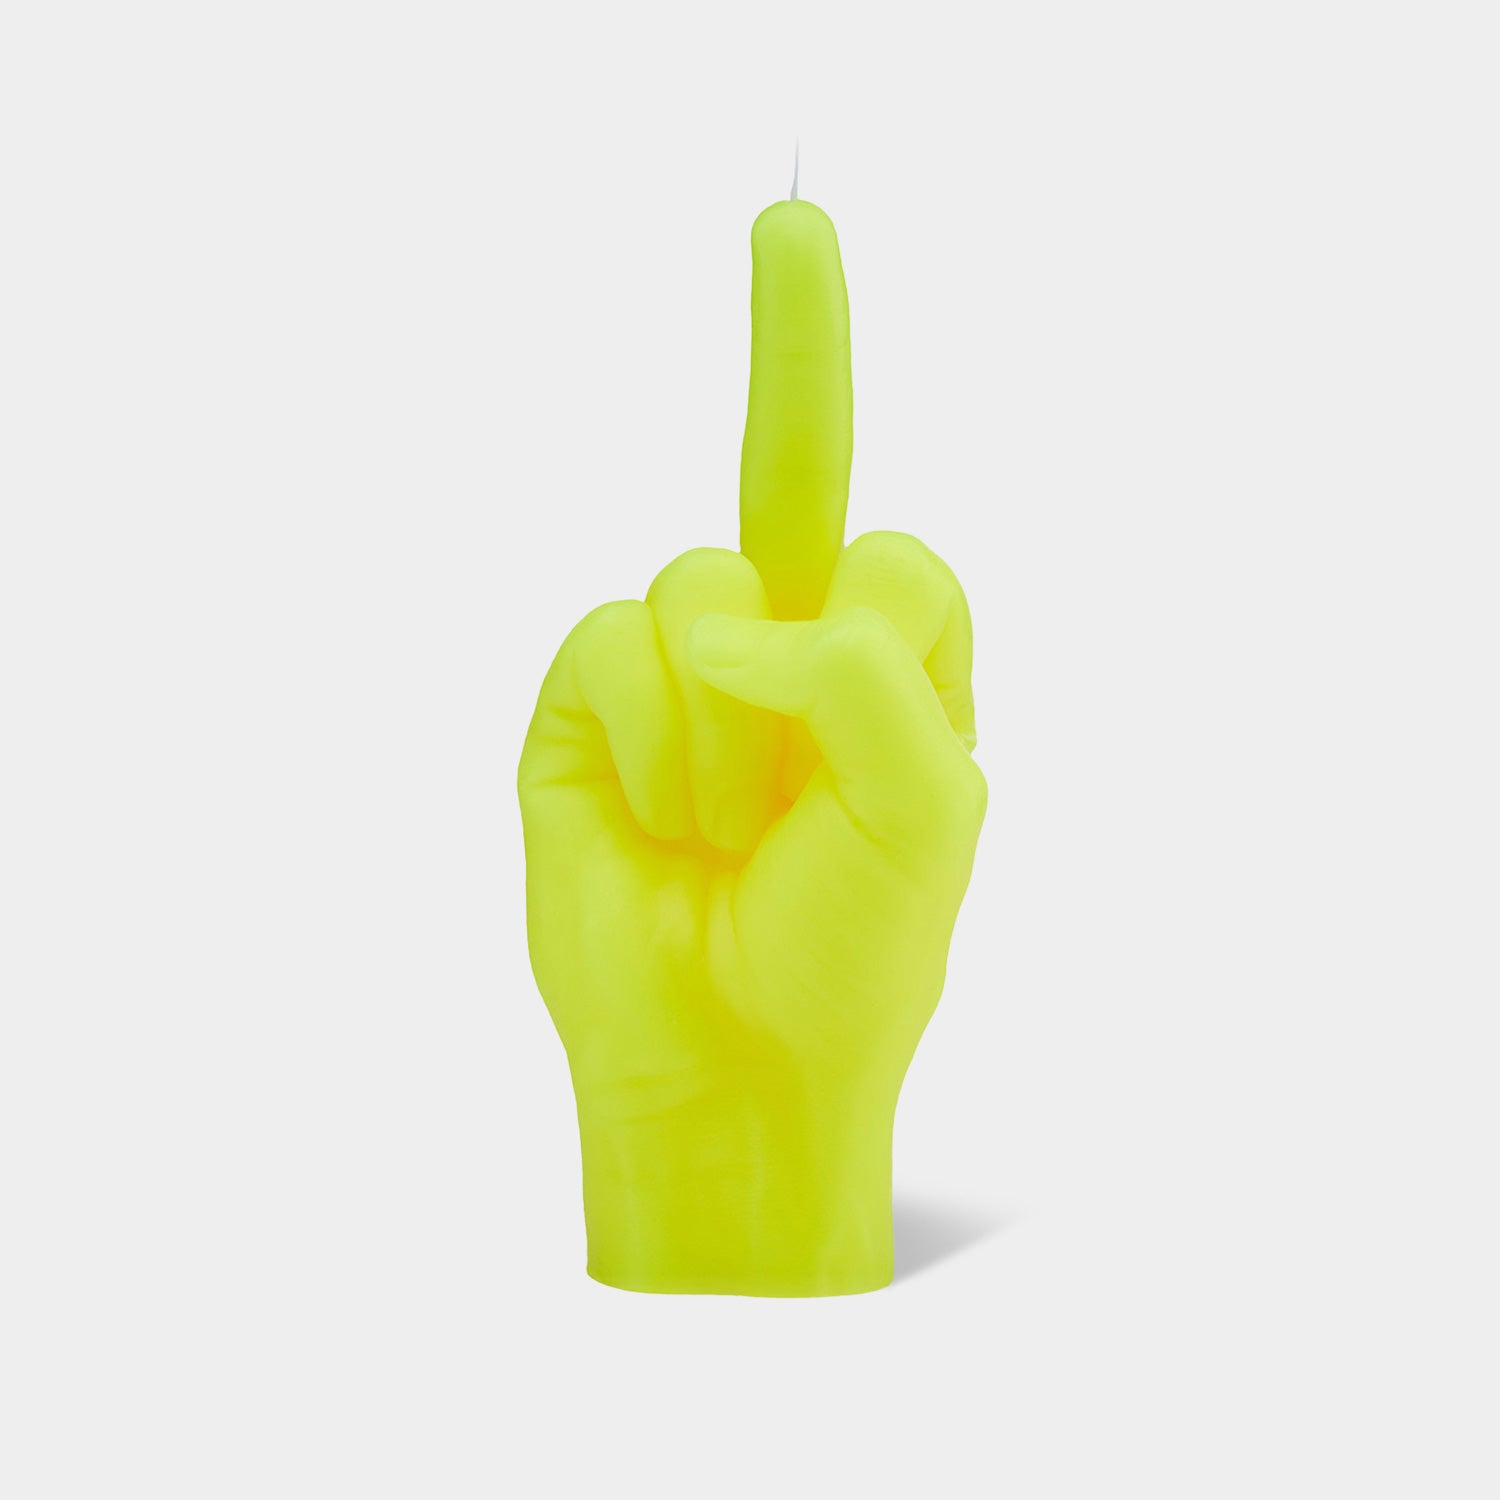 CandleHand "Fcuk You" Candle - Neon Yellow